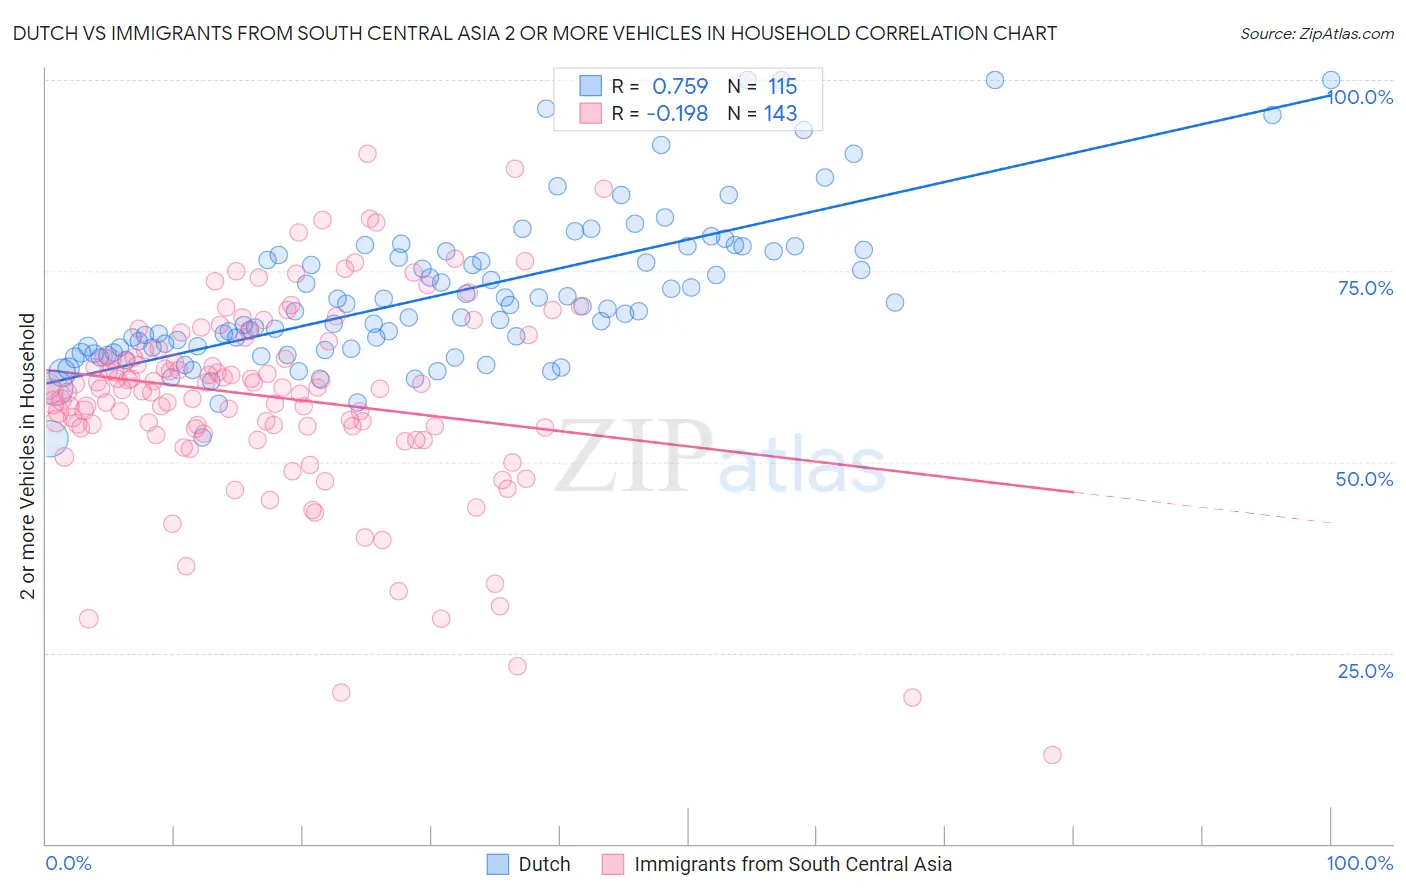 Dutch vs Immigrants from South Central Asia 2 or more Vehicles in Household